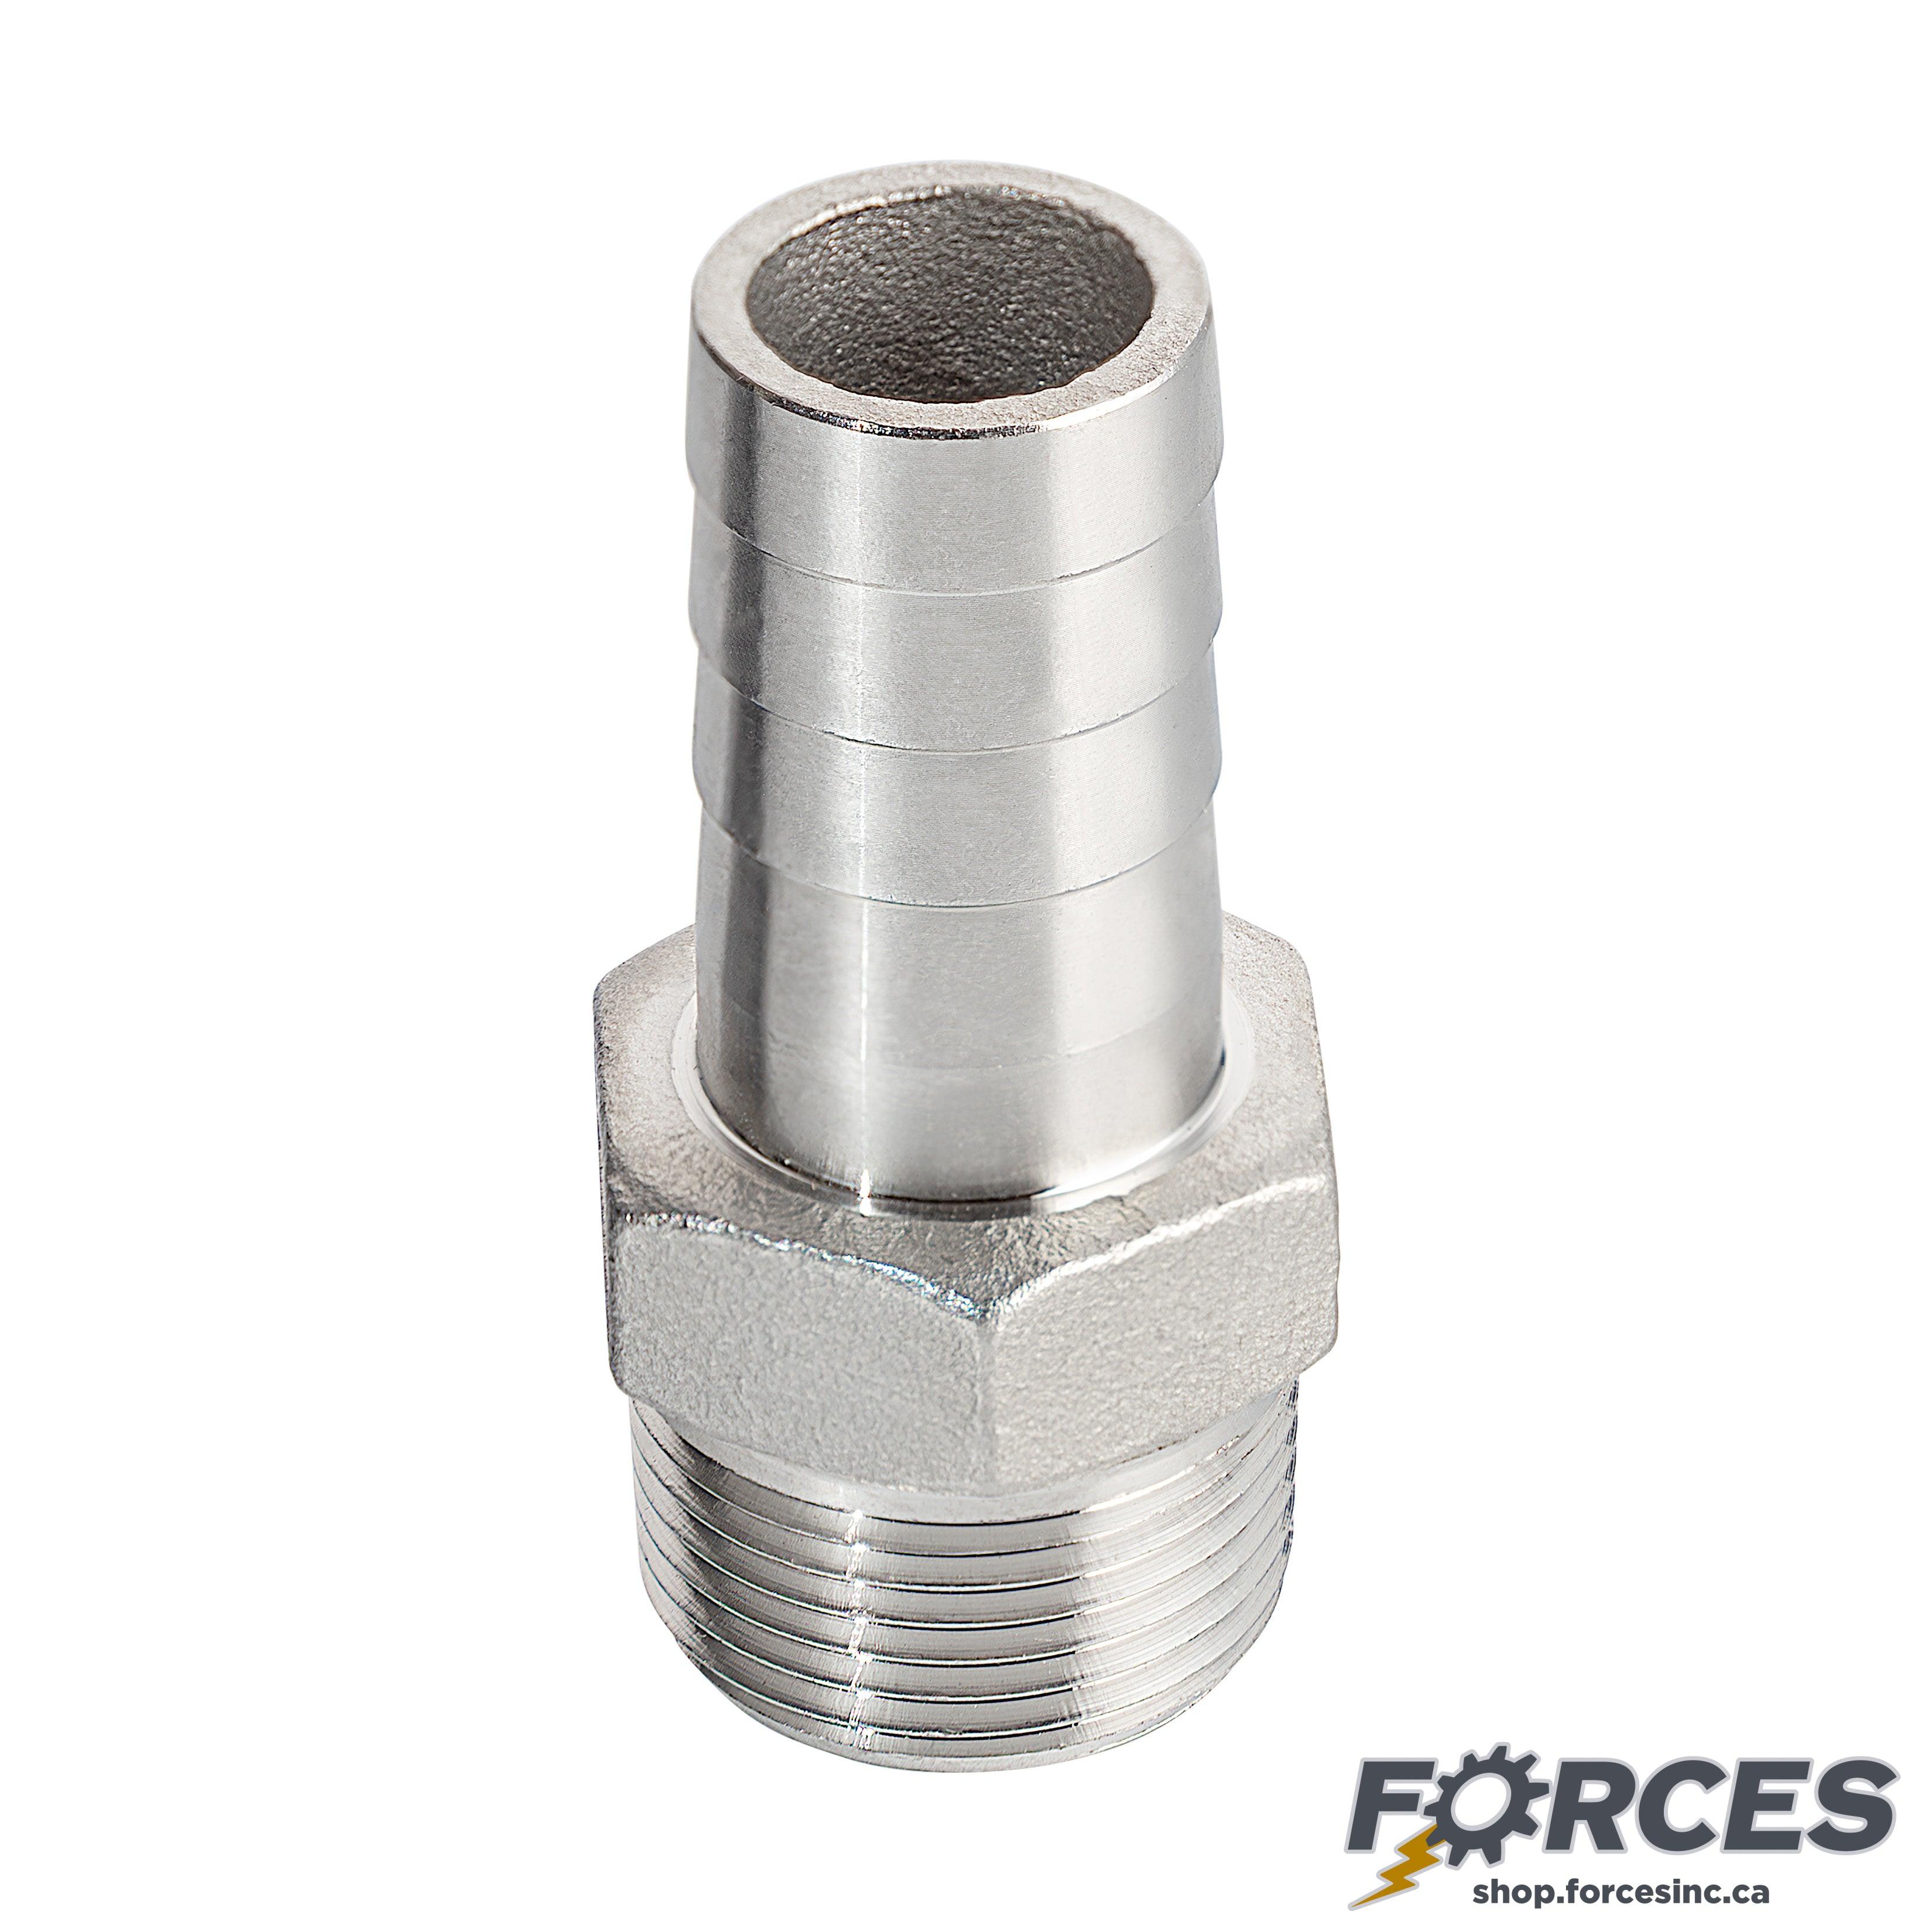 Hose Barb 1/4" x 1/4" NPT #150 - Stainless Steel 316 - Forces Inc